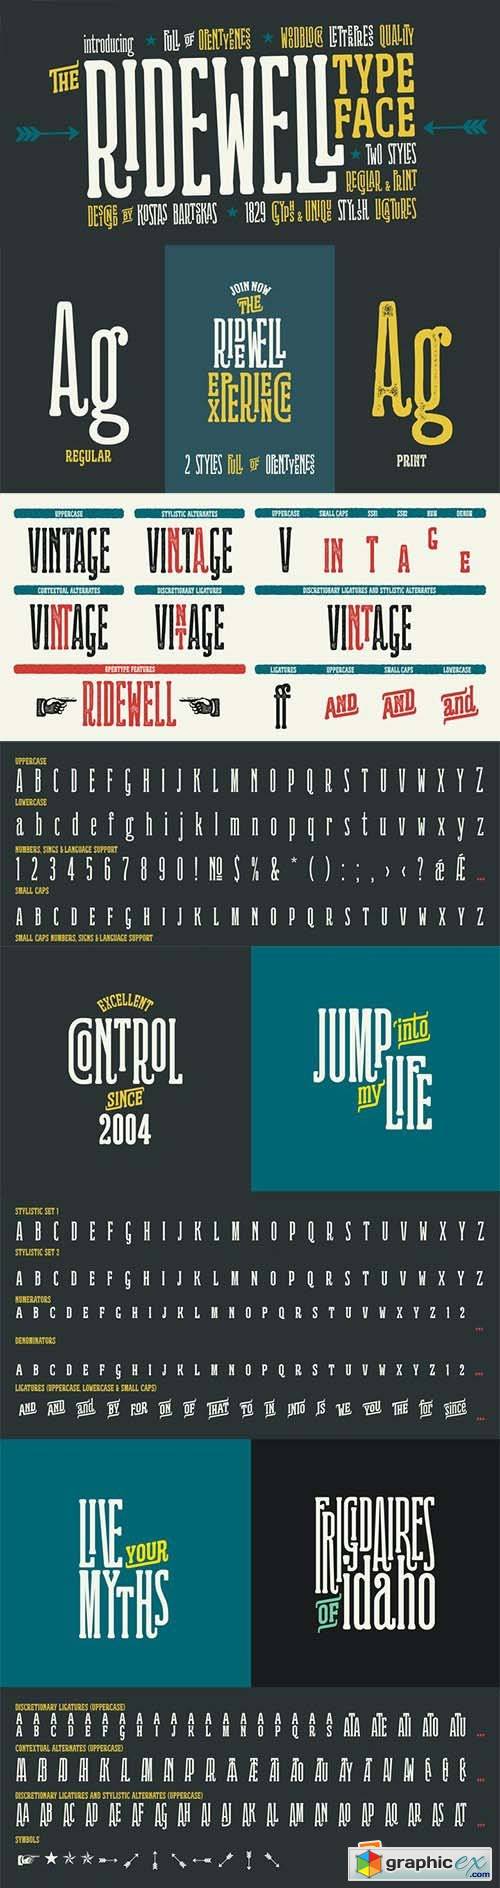 Ridewell Font Family - 2 Fonts 75$